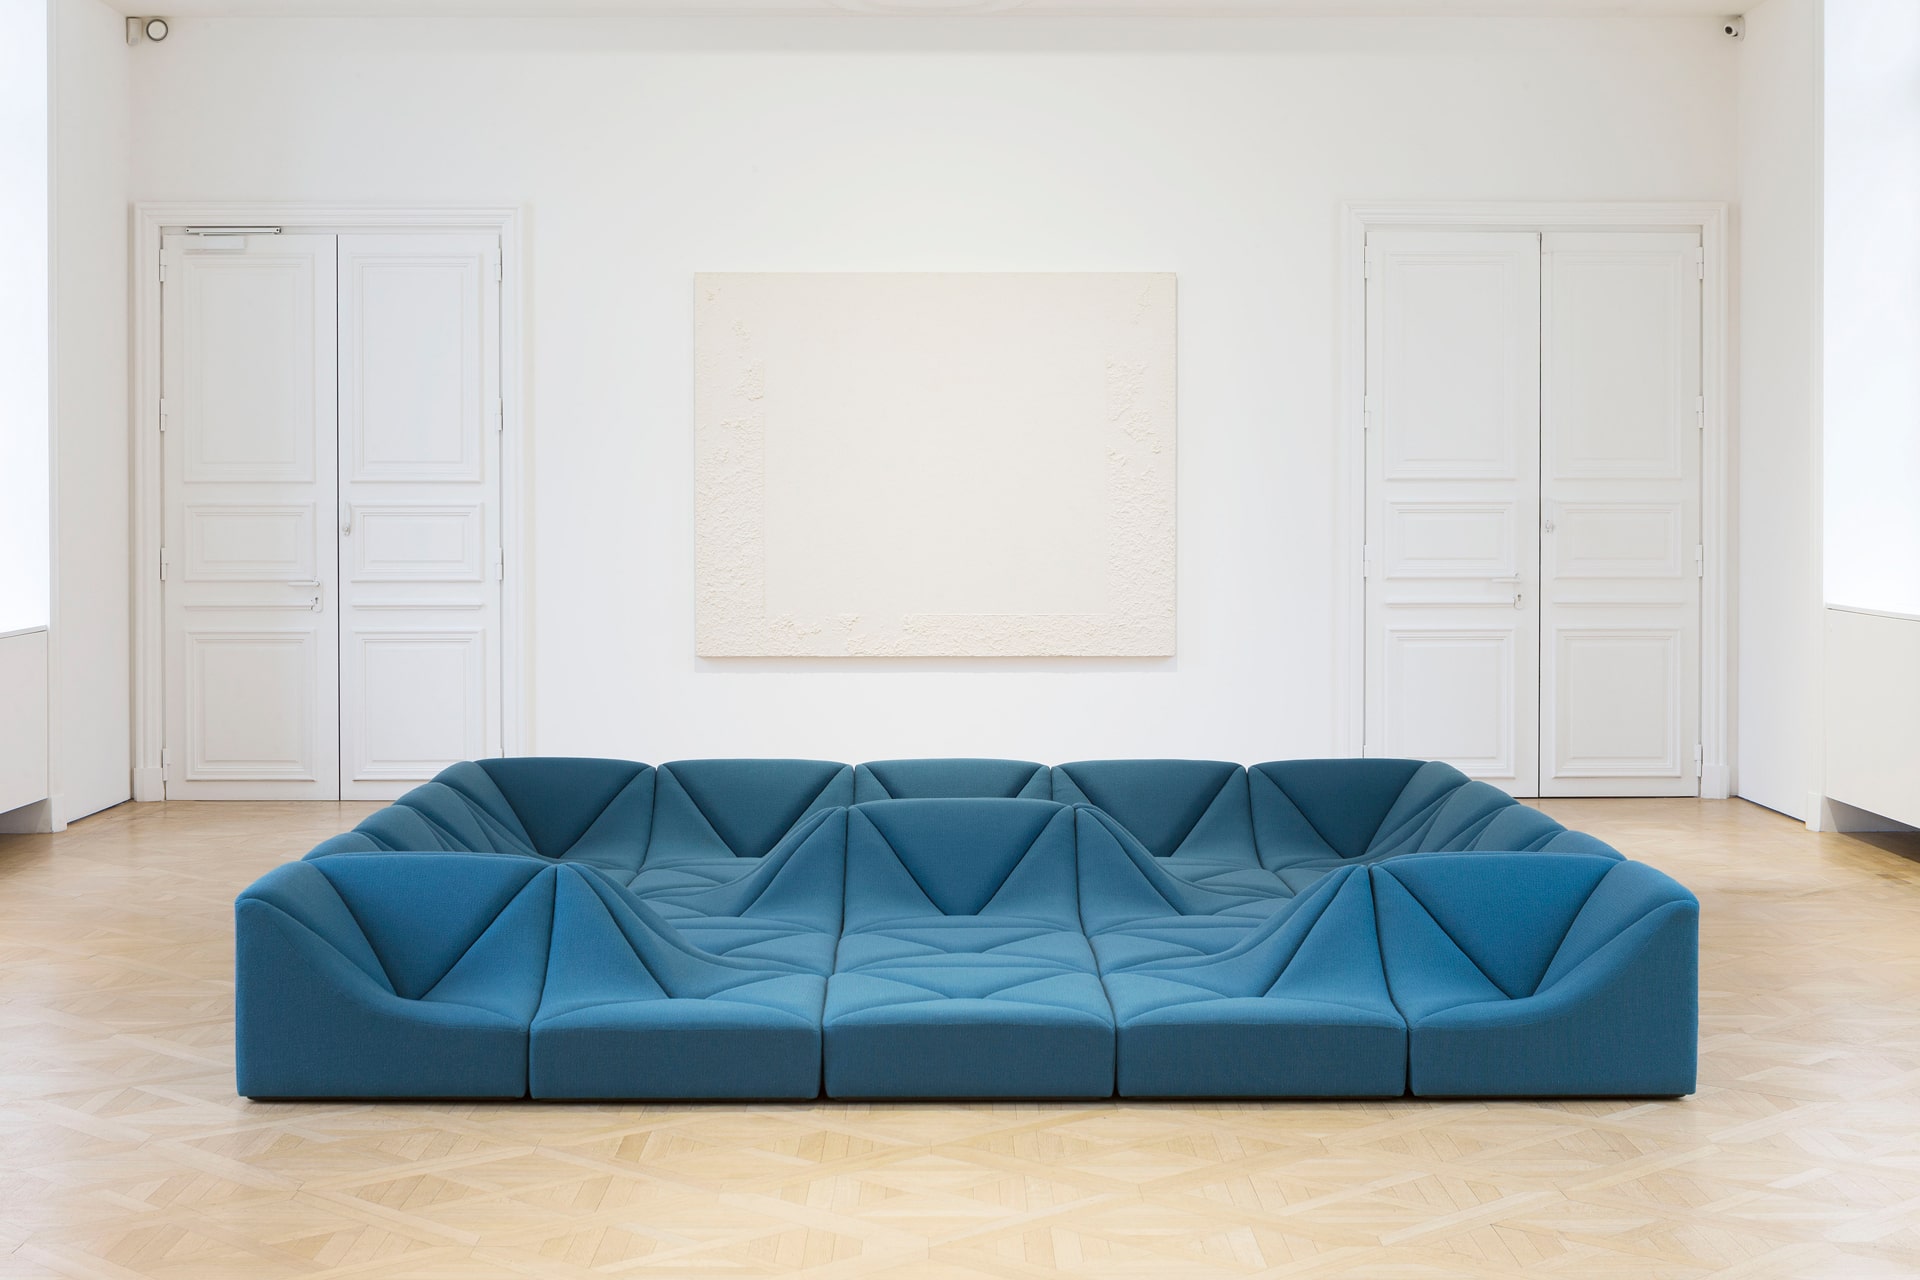 One of furniture designer Pierre Paulin's modern chairs sits in the middle of a large art gallery. 